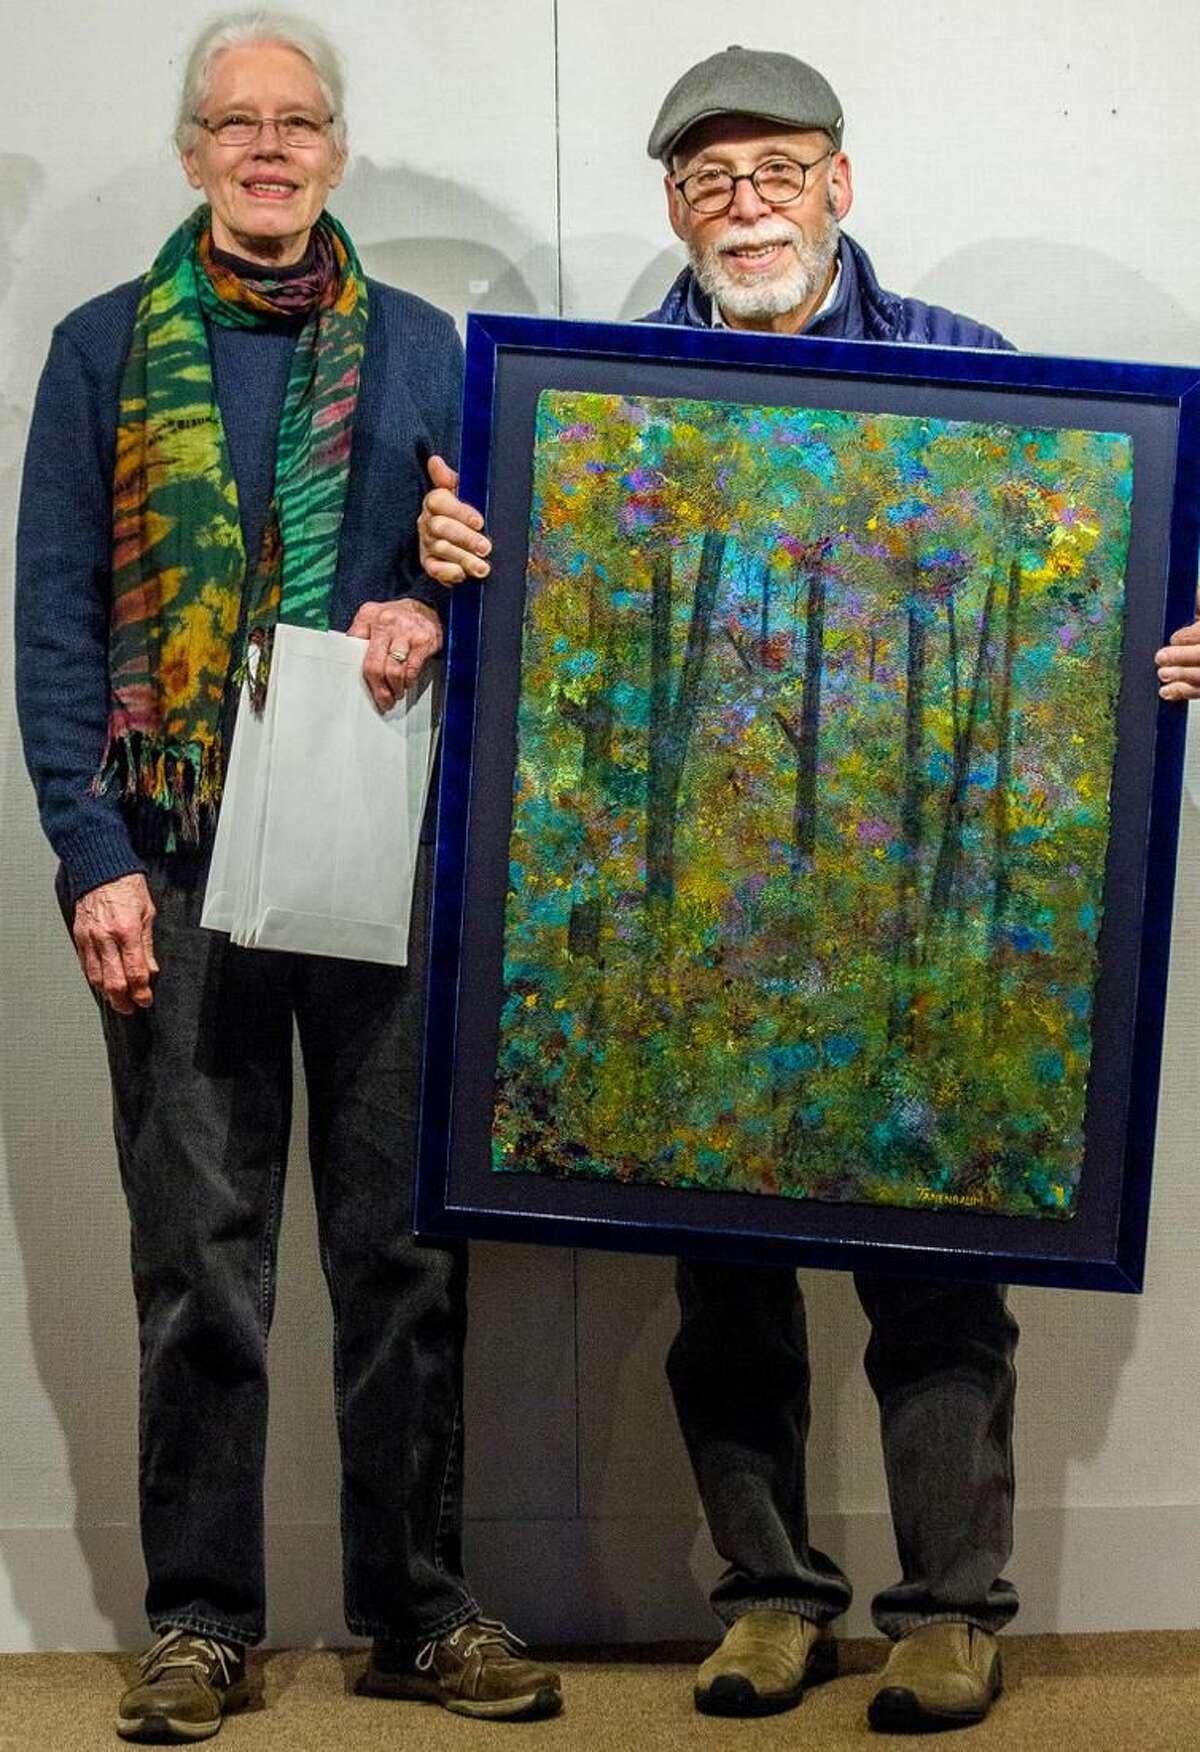 Steven Tanenbaum, of New Milford, receives an "Award of Excellence" for his acrylic, “Enchanted Forest."